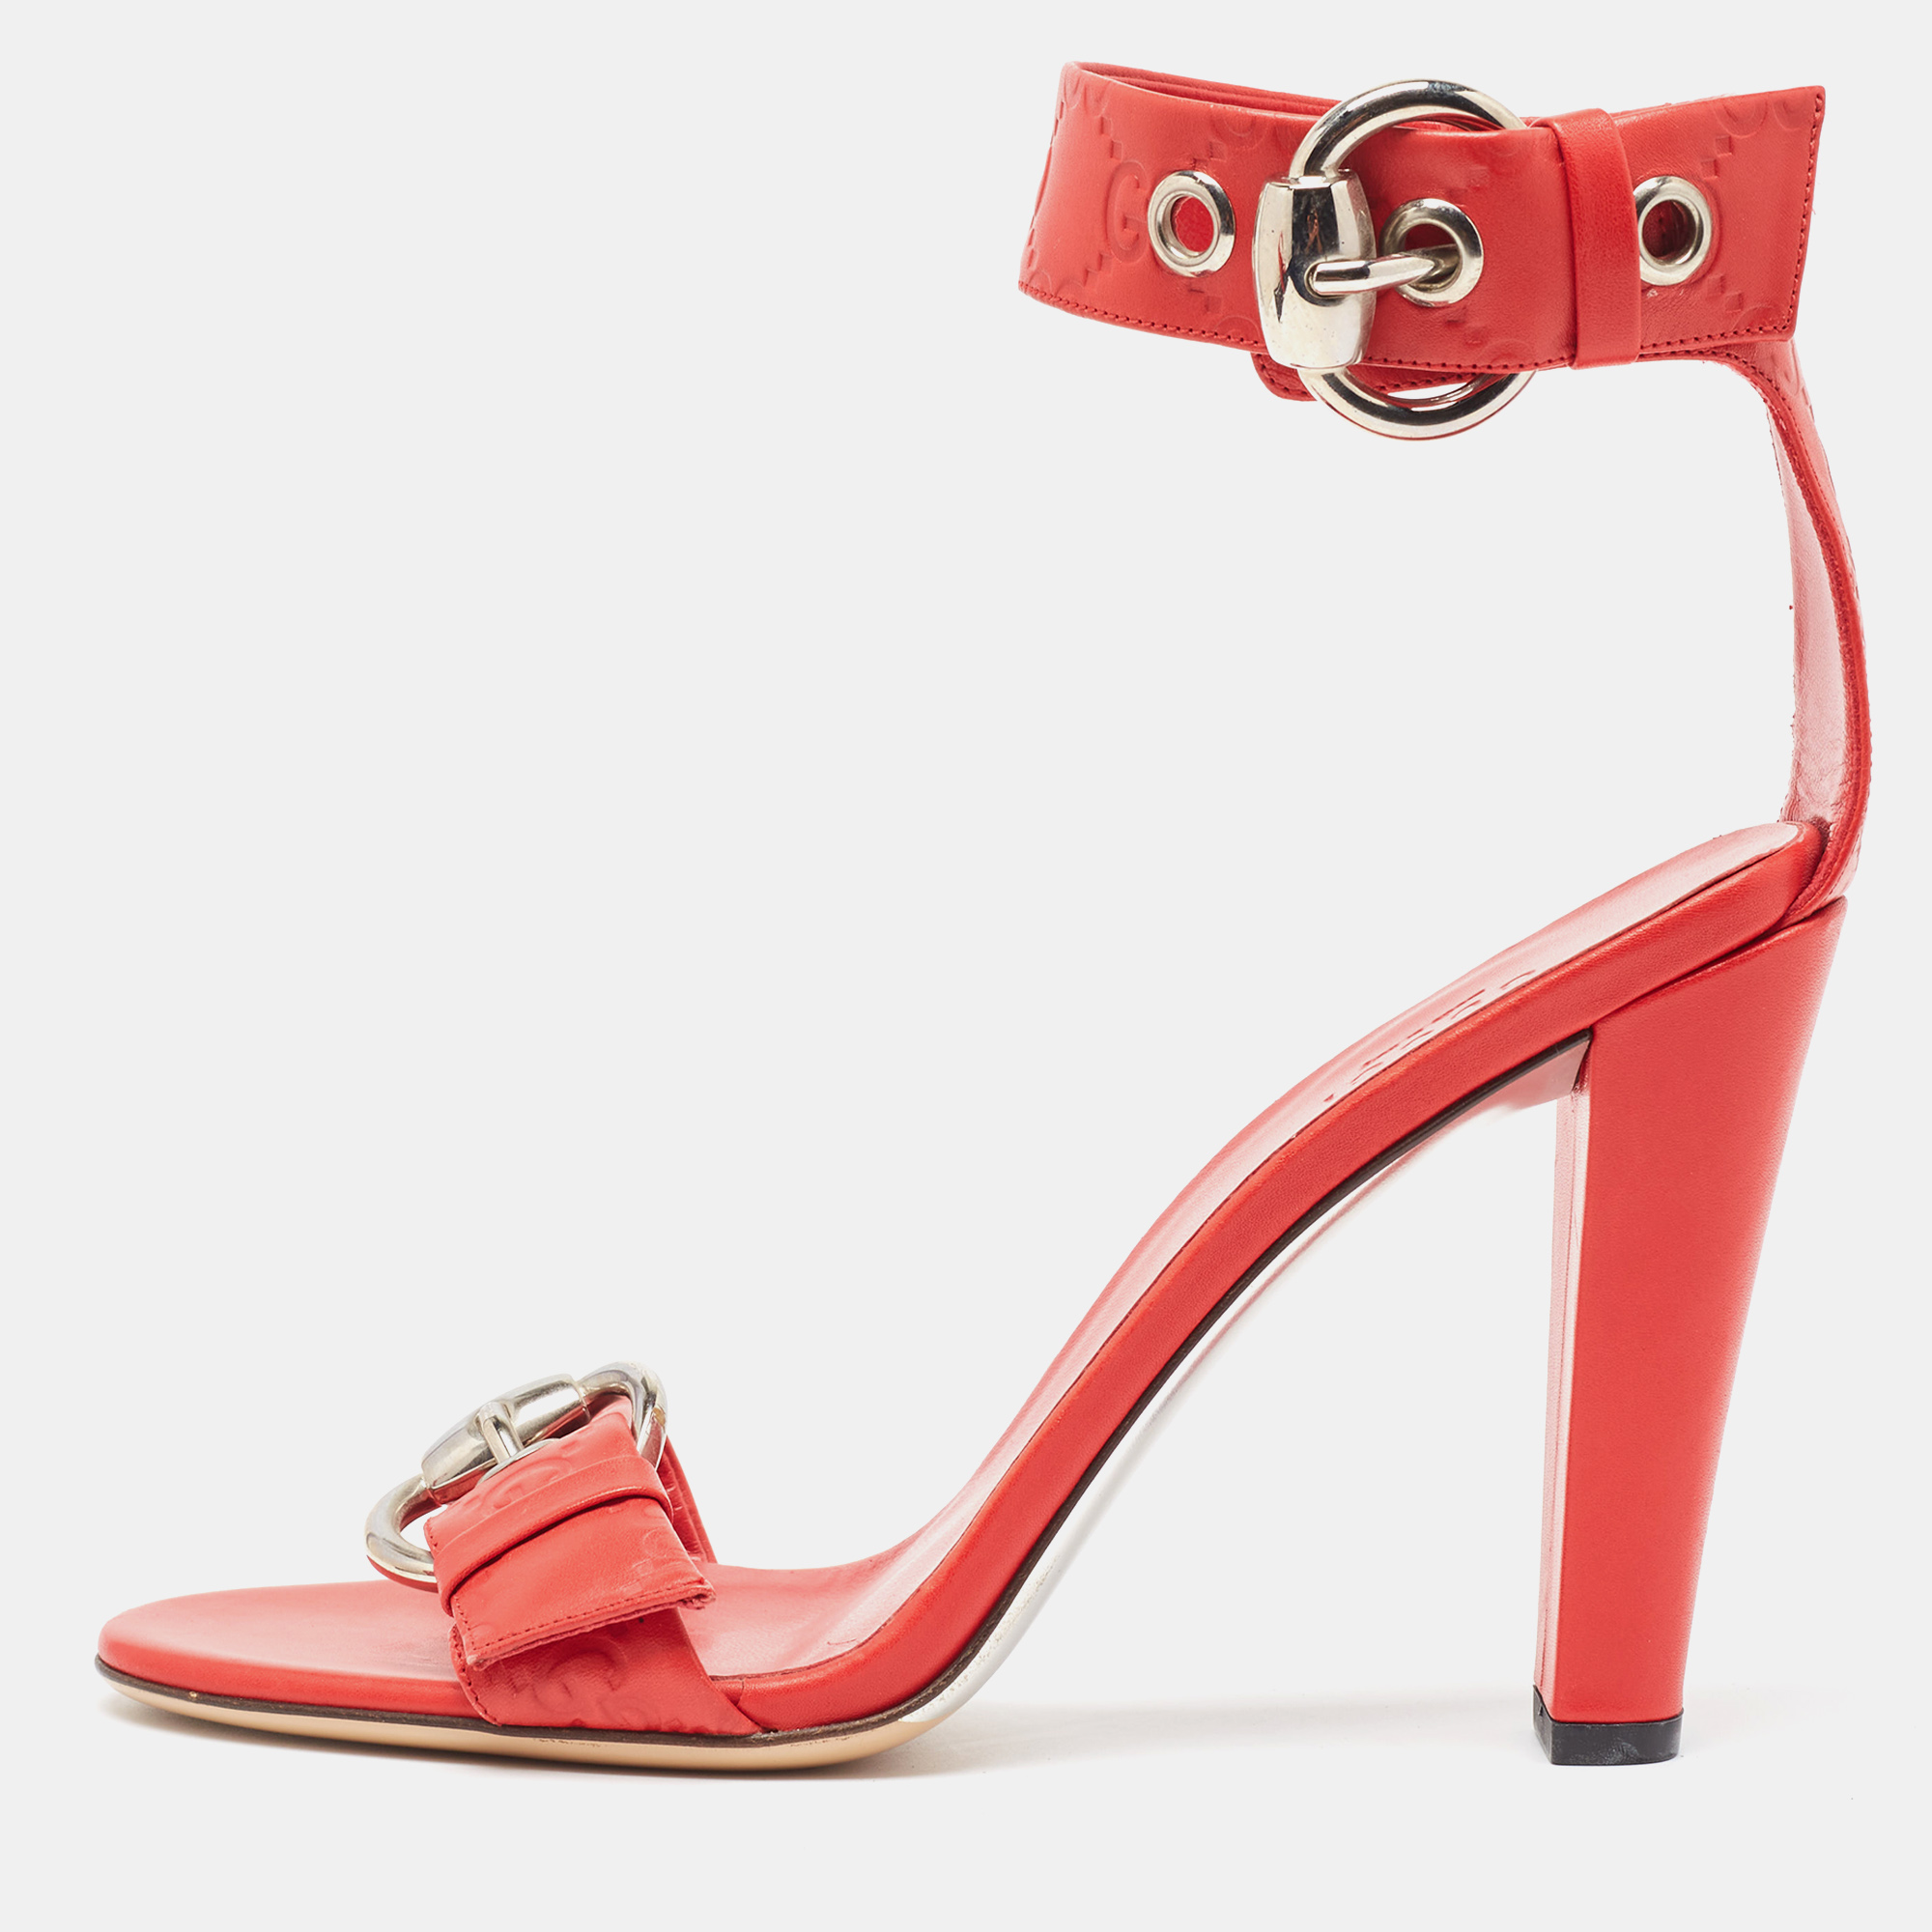 Gucci red guccissima leather ankle strap sandals size 38